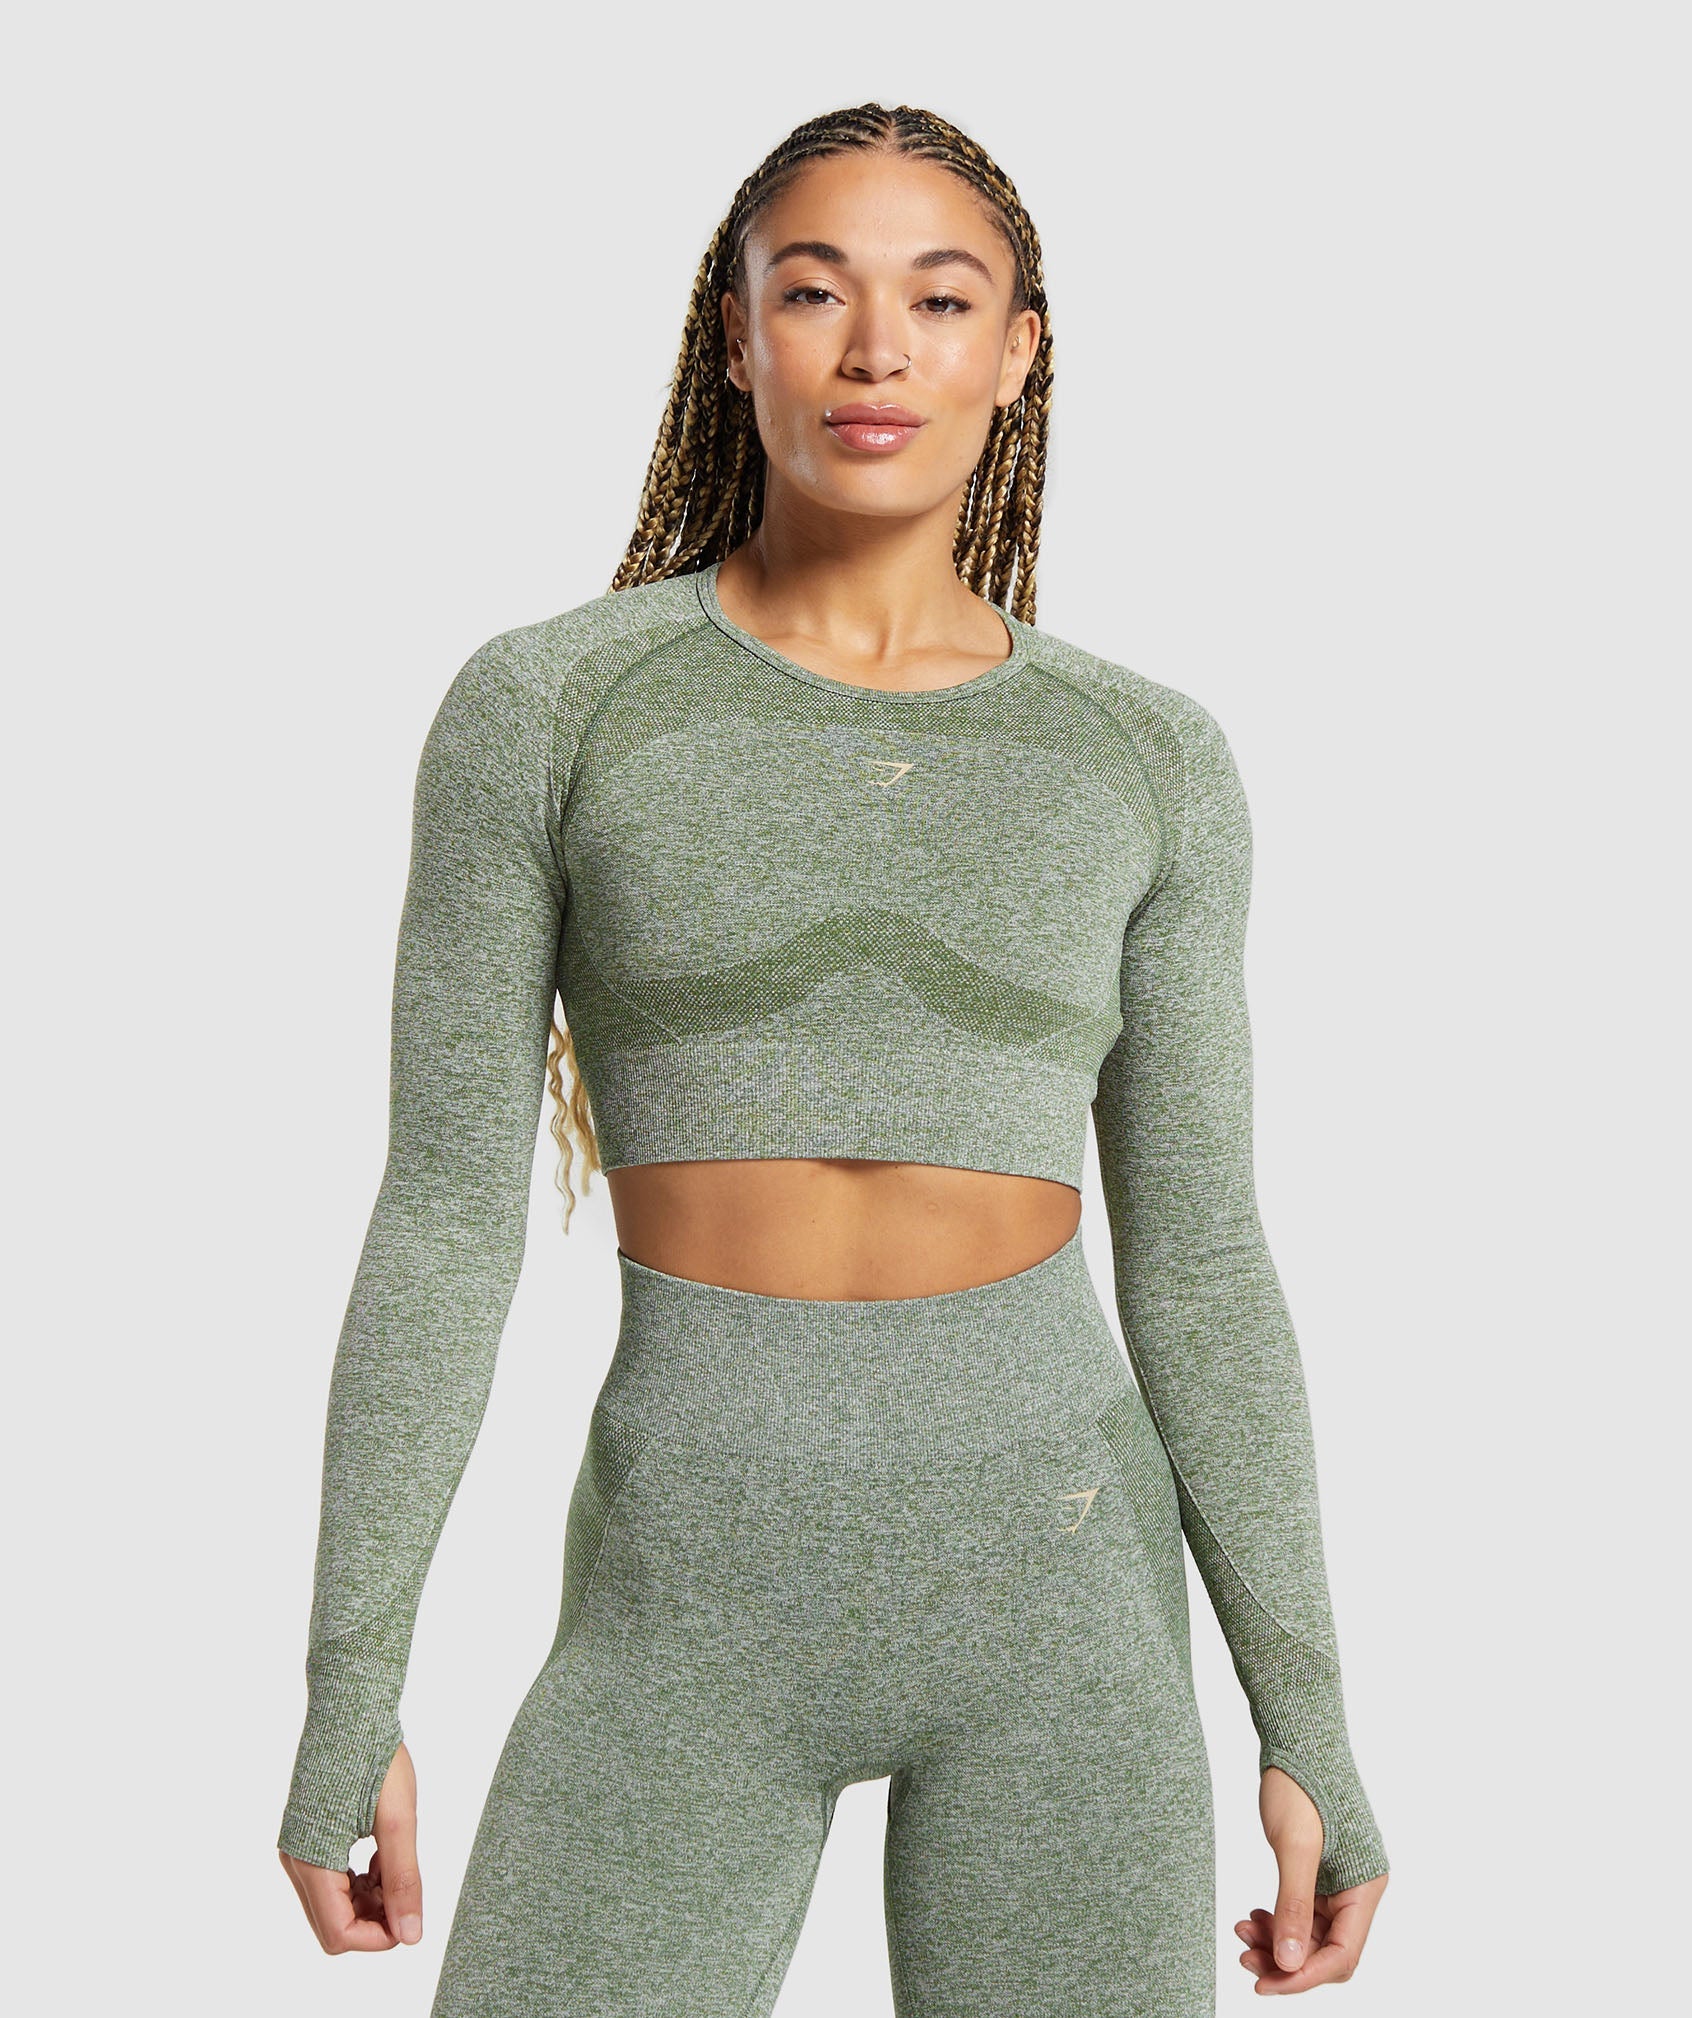 Flex Sports Long Sleeve Crop Top in {{variantColor} is out of stock